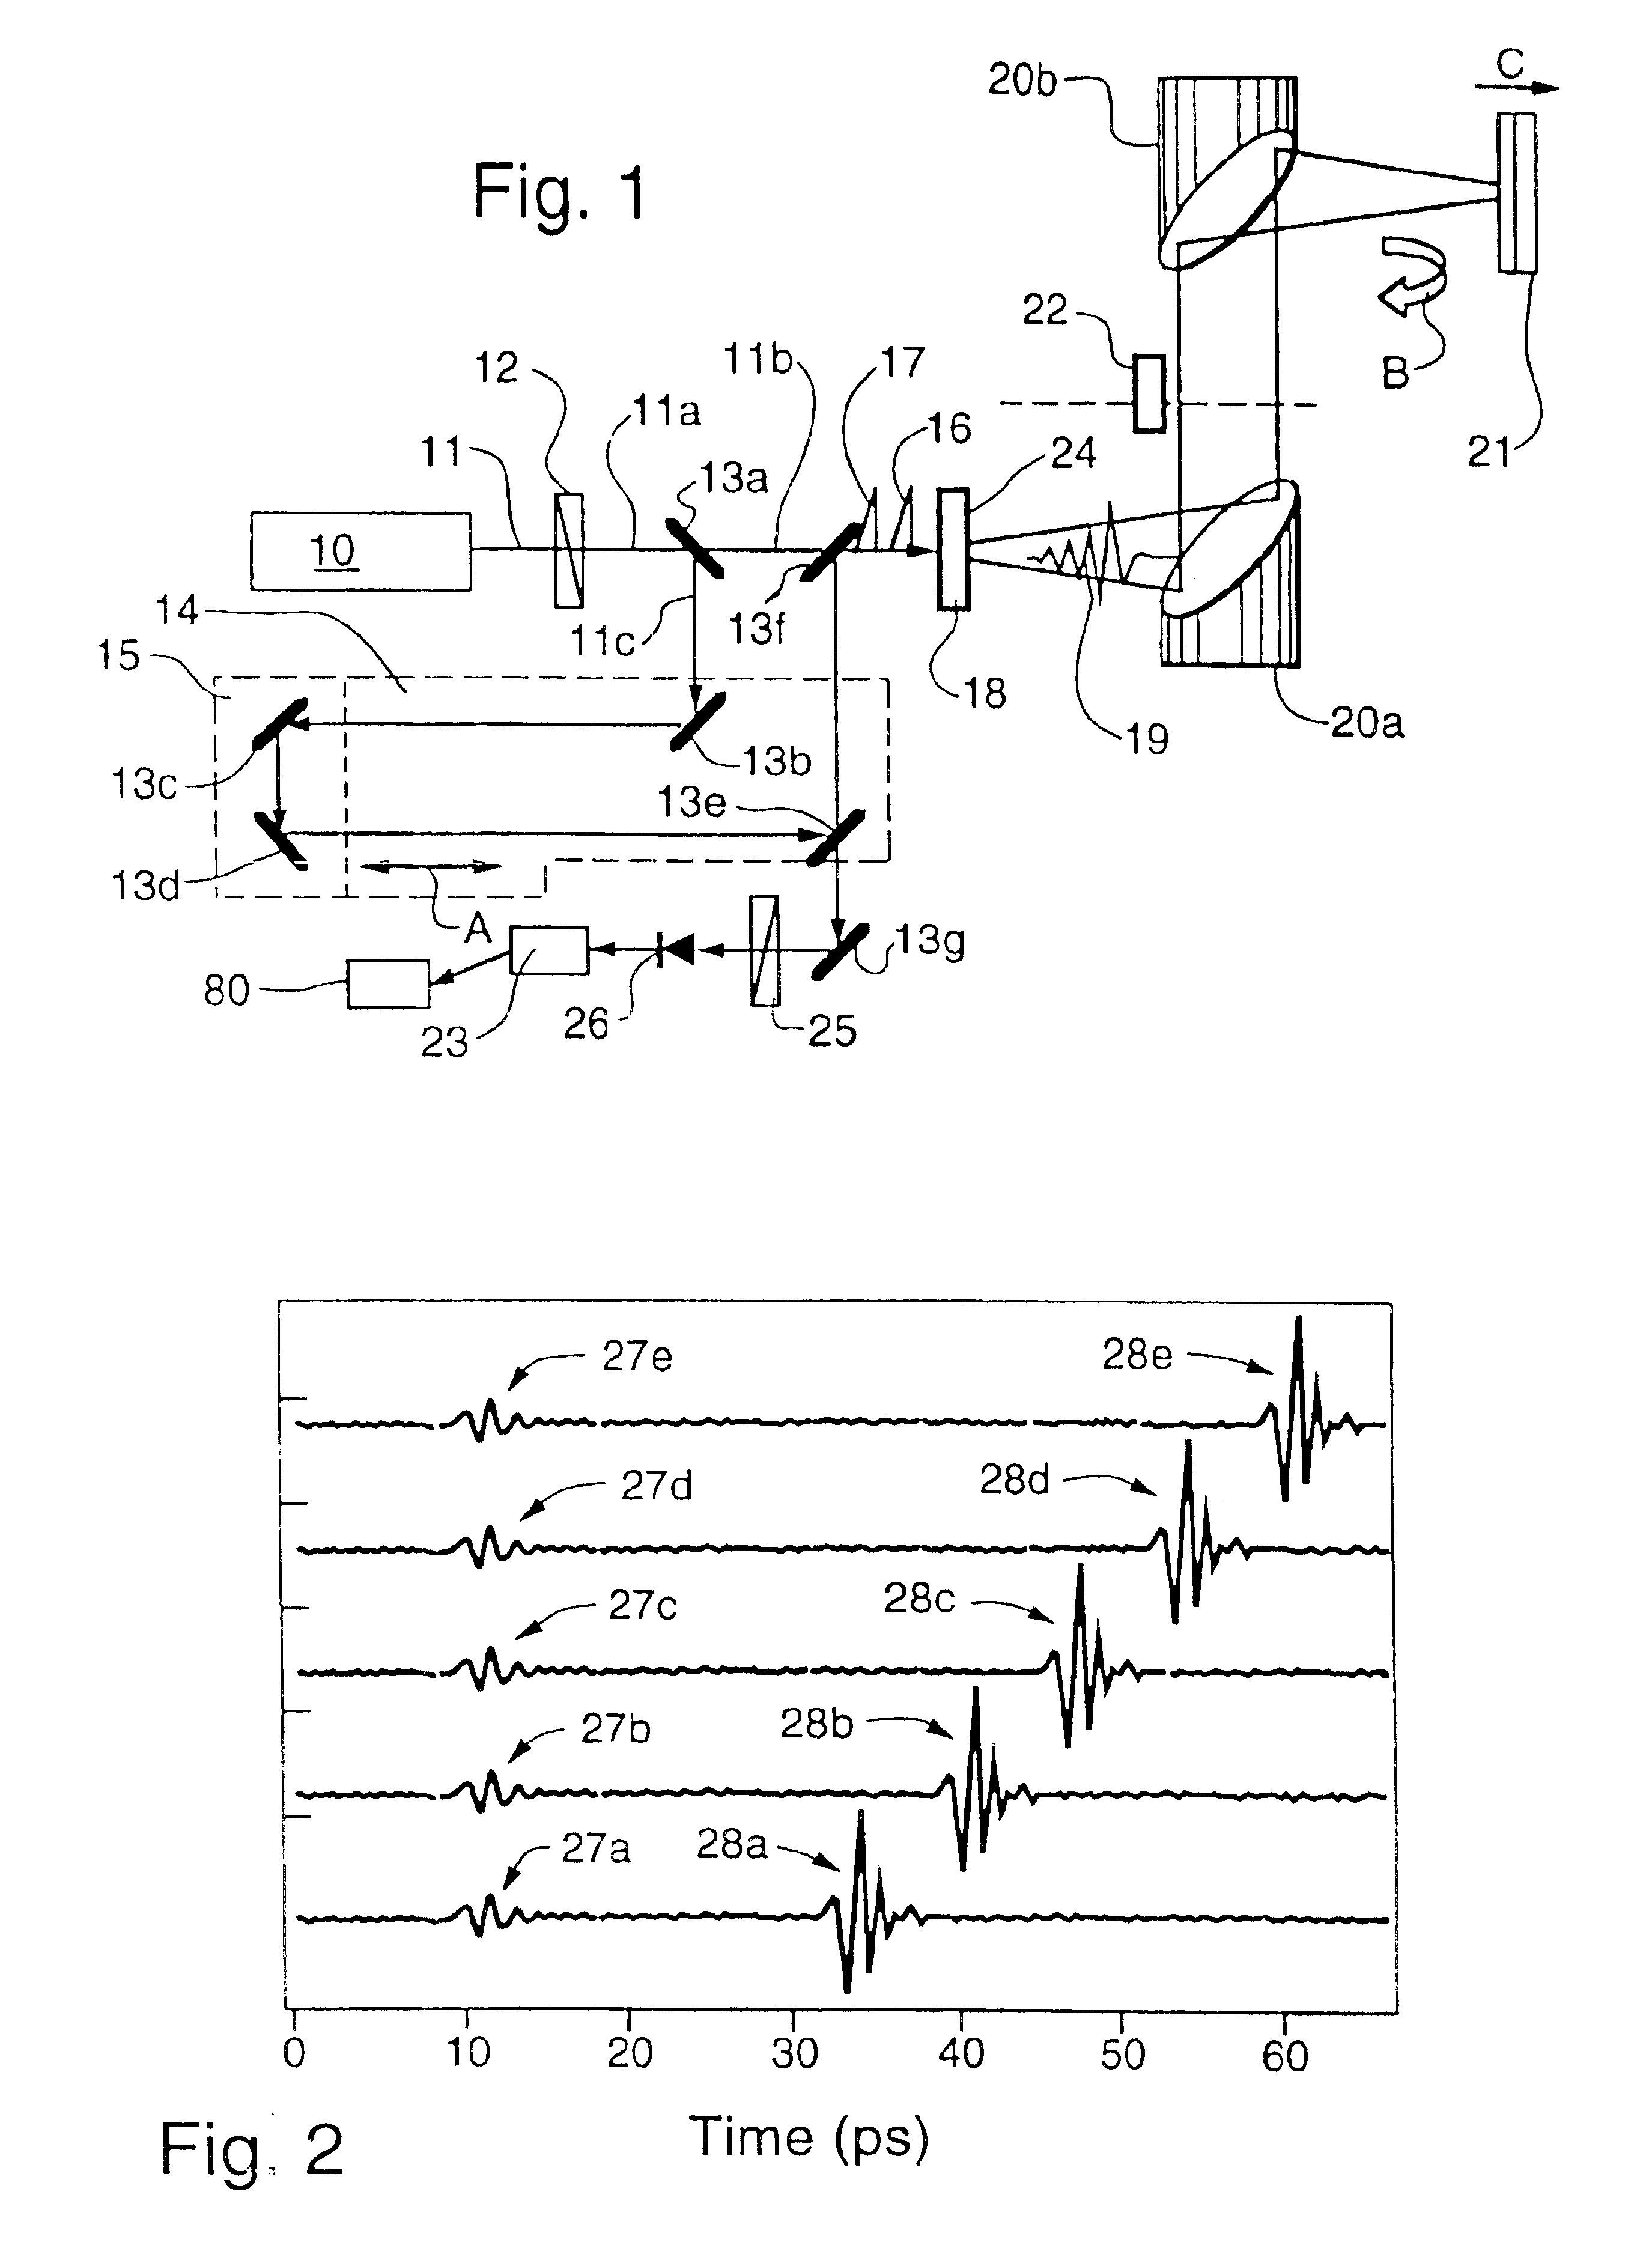 Terahertz transceivers and methods for emission and detection of terahertz pulses using such transceivers